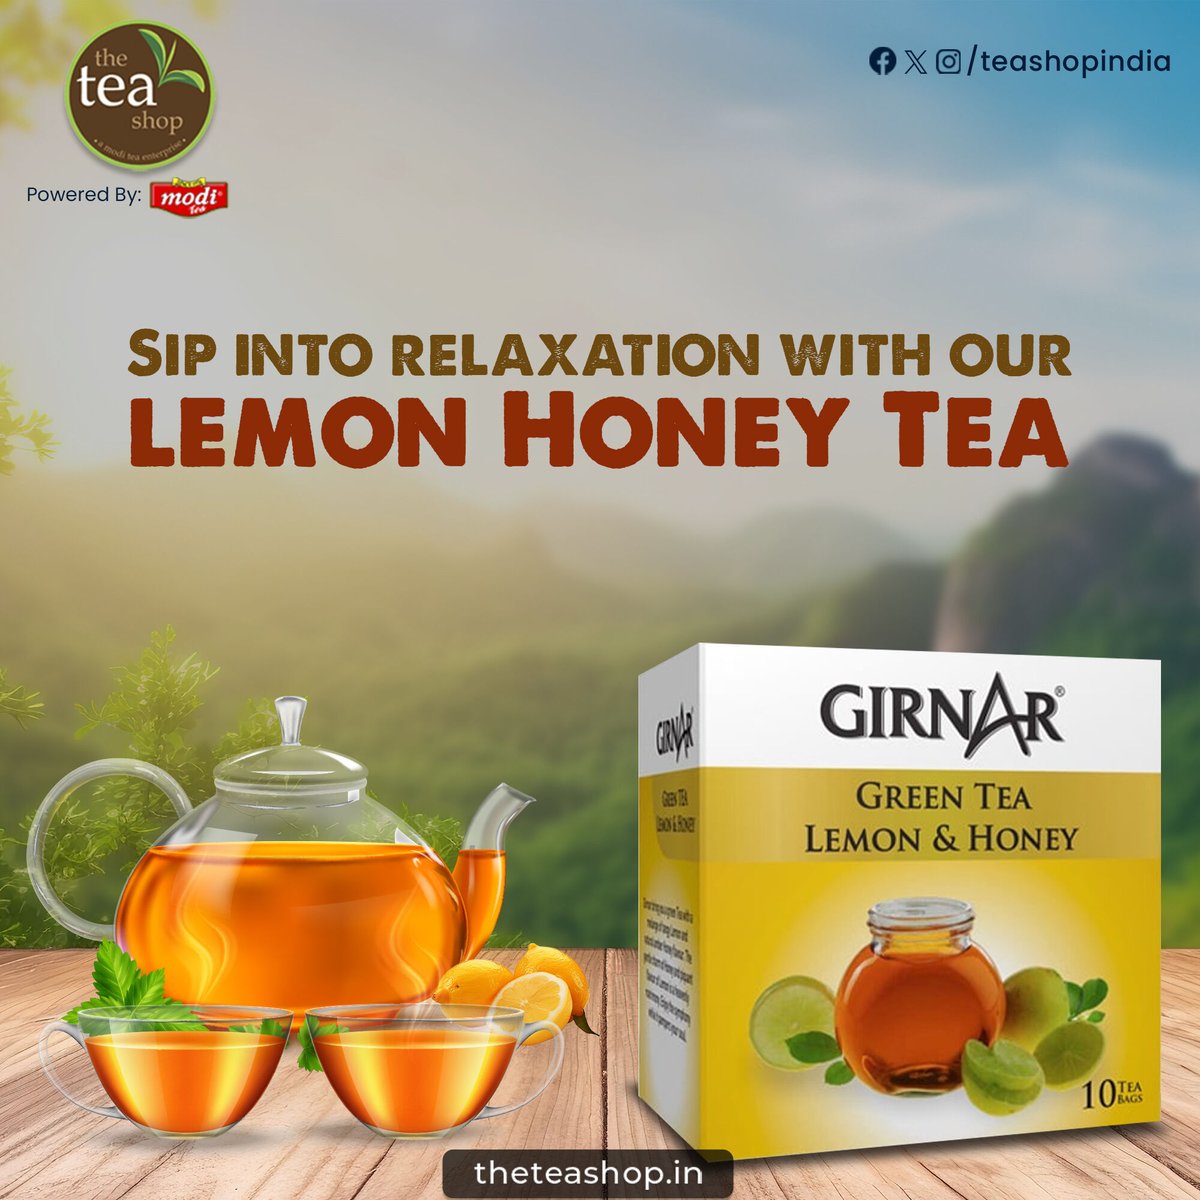 Take a sip, and let the golden warmth of lemon & honey tea soothe your soul this summer.
.
.
.
#theteashop #teashop #tea #teatime #lemonandhoneytea #lemonandhoney #lemontea #honeytea #girnartea #girnar #summertea #teabrand #chai #tealovers #chailovers #freshtea #steamingcupoftea